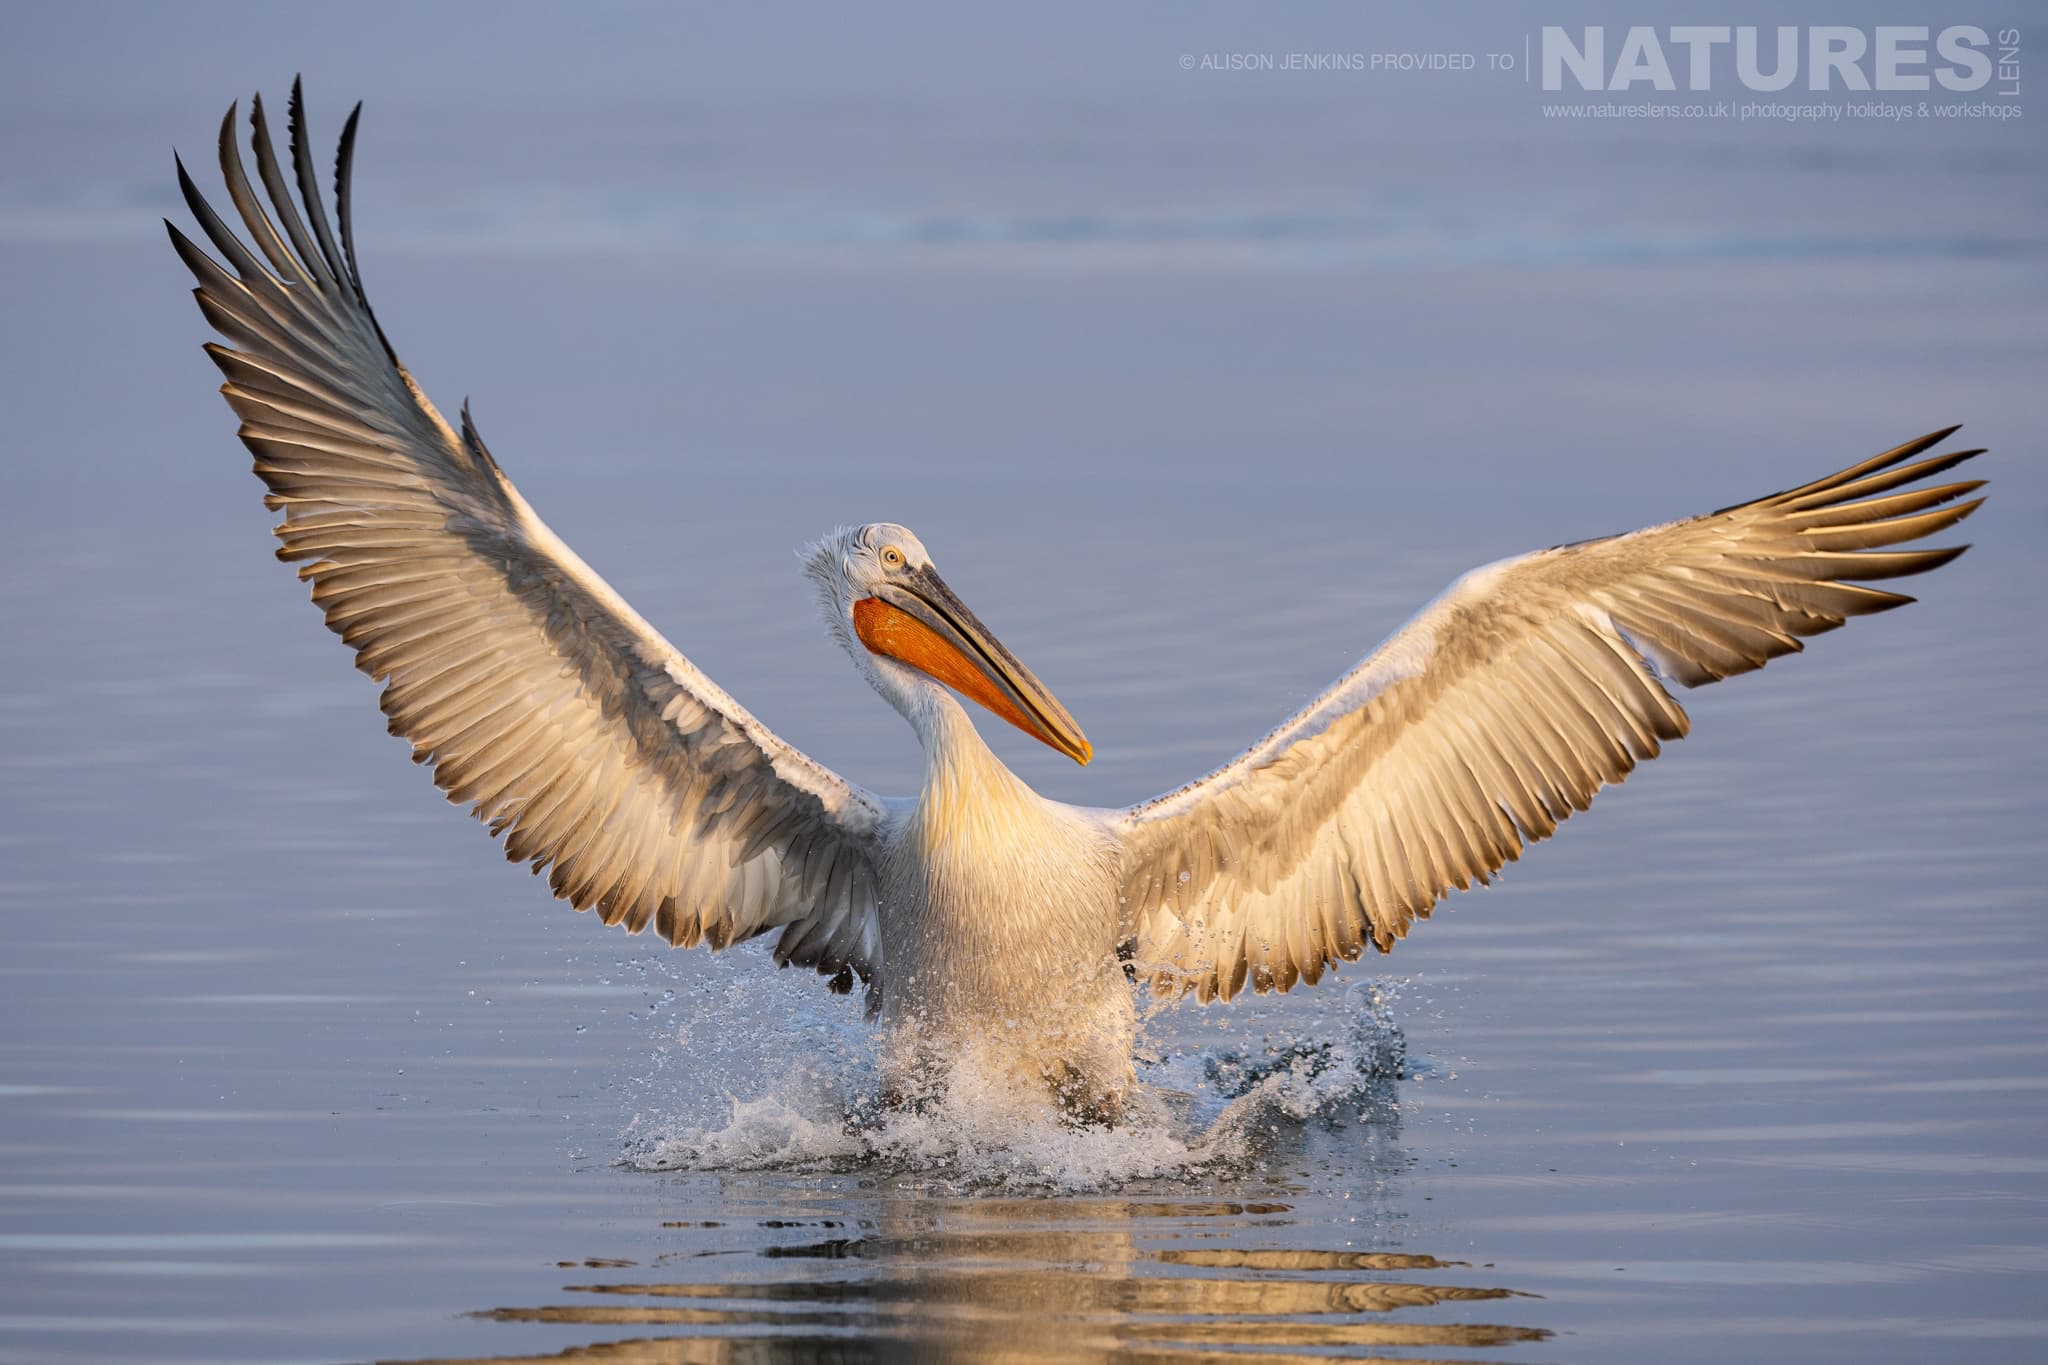 One Of The Pelicans Of Lake Kerkini Landing On The Waters Of The Lake Photographed During A Natureslens Wildlife Photography Holiday